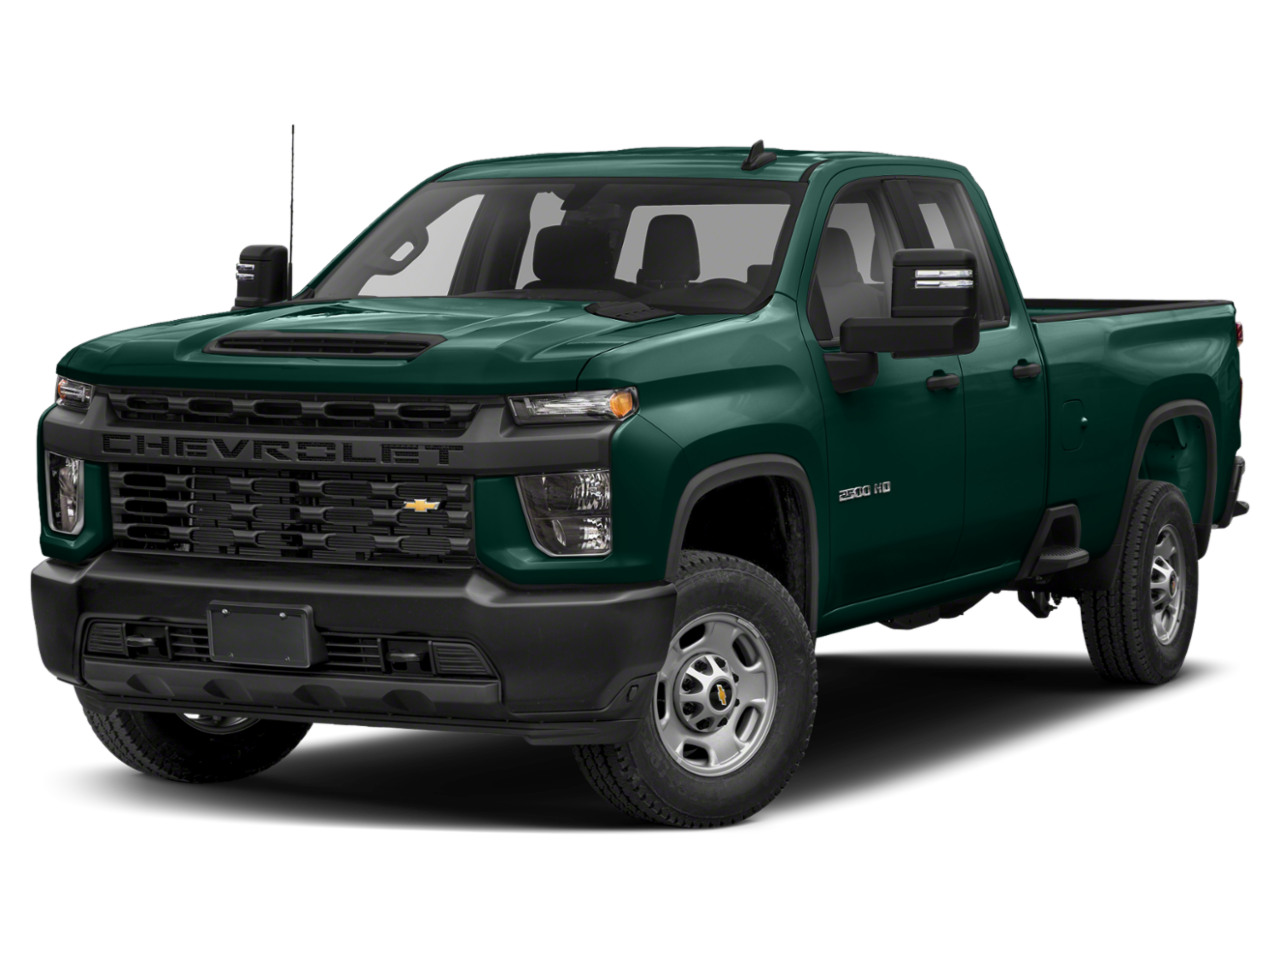 New Chevrolet Silverado 2500HD from your East Providence, RI dealership